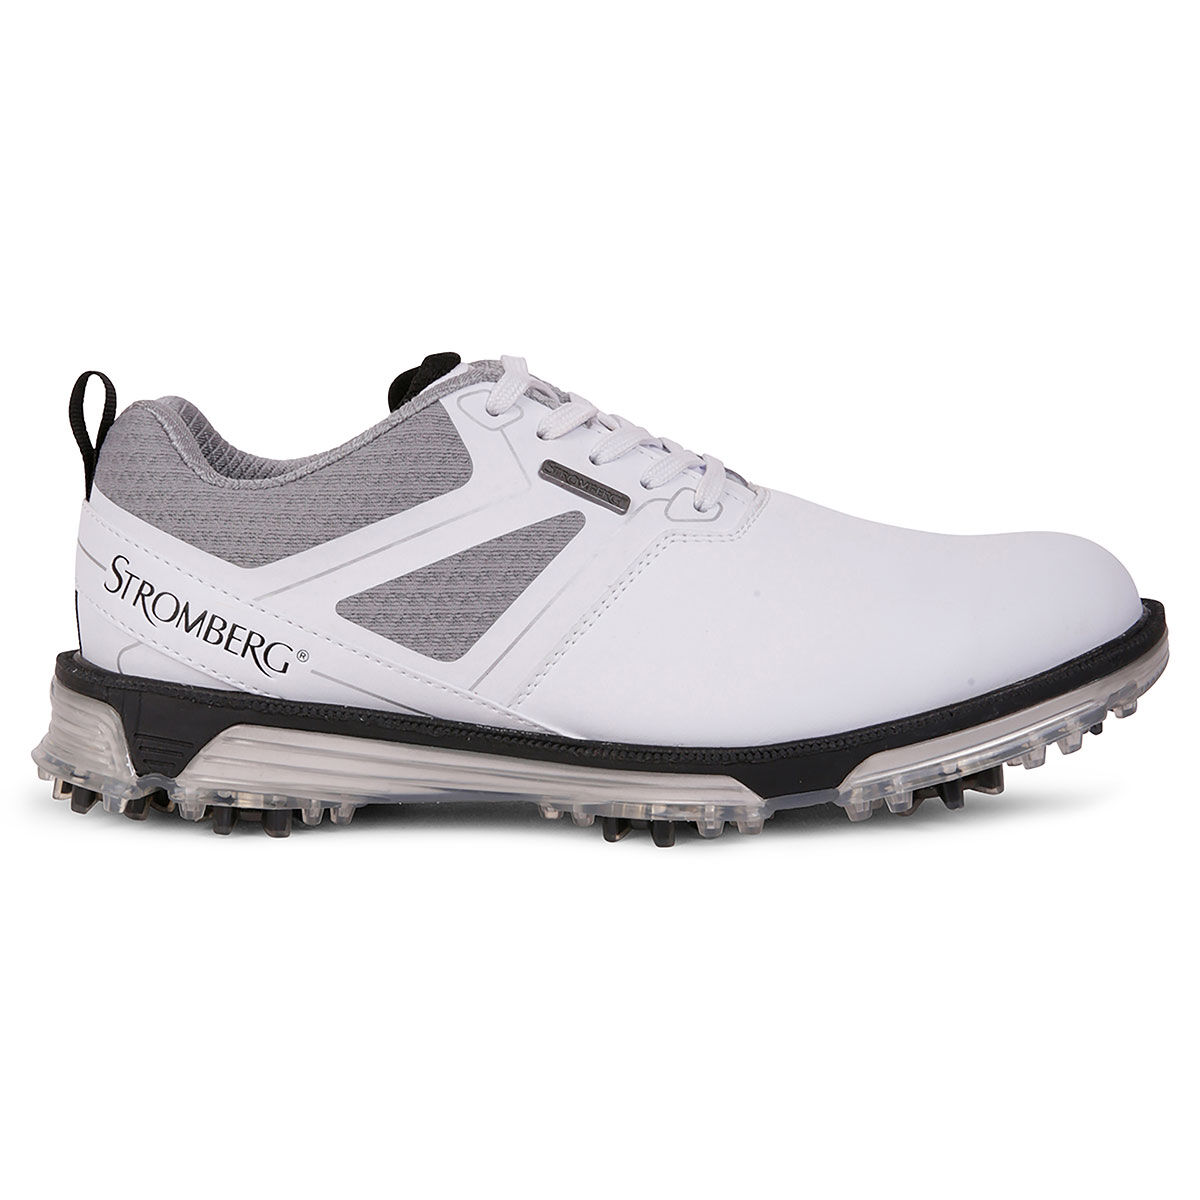 Stromberg Men’s Tour Classic Waterproof Spiked Golf Shoes, Mens, White, 7 | American Golf